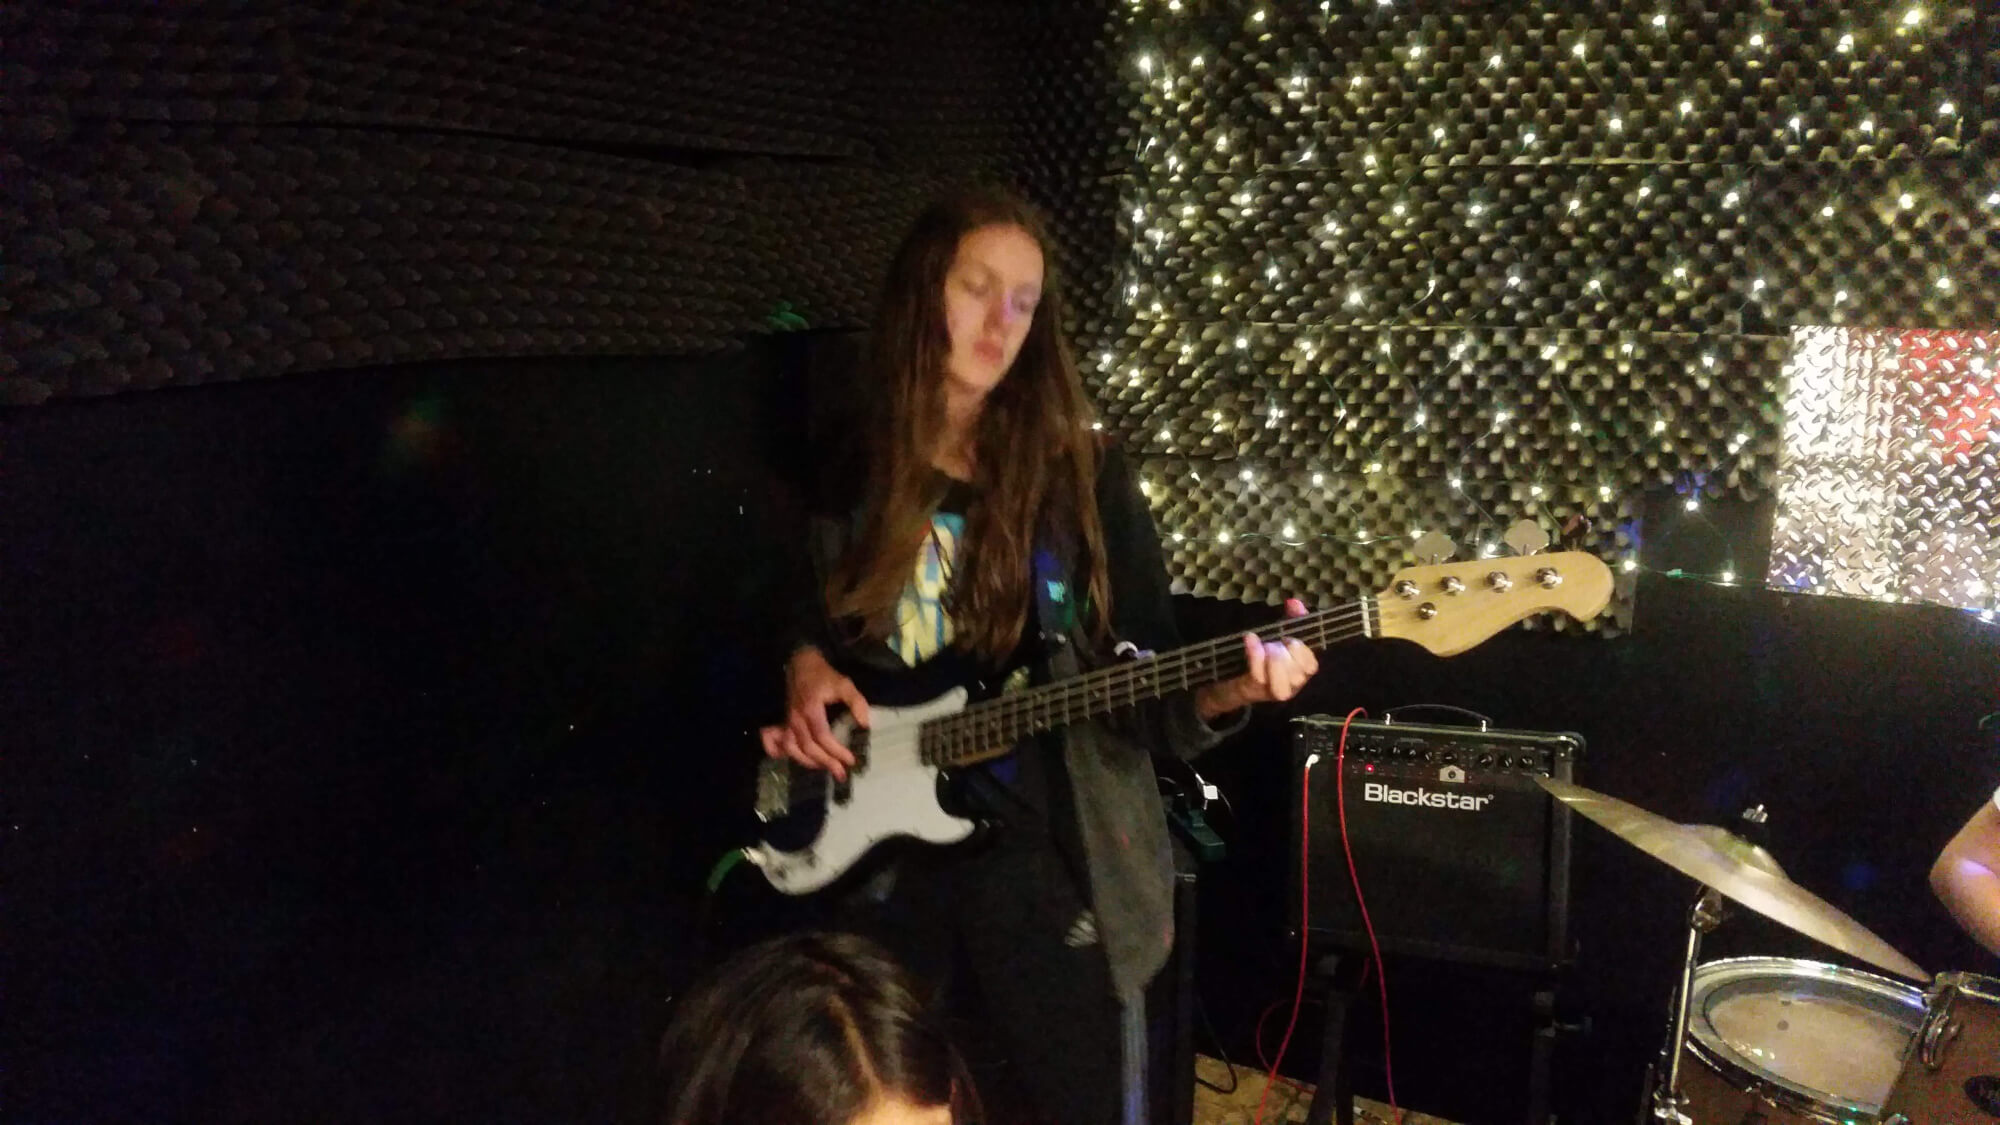 One of our students rehearses her bass part.